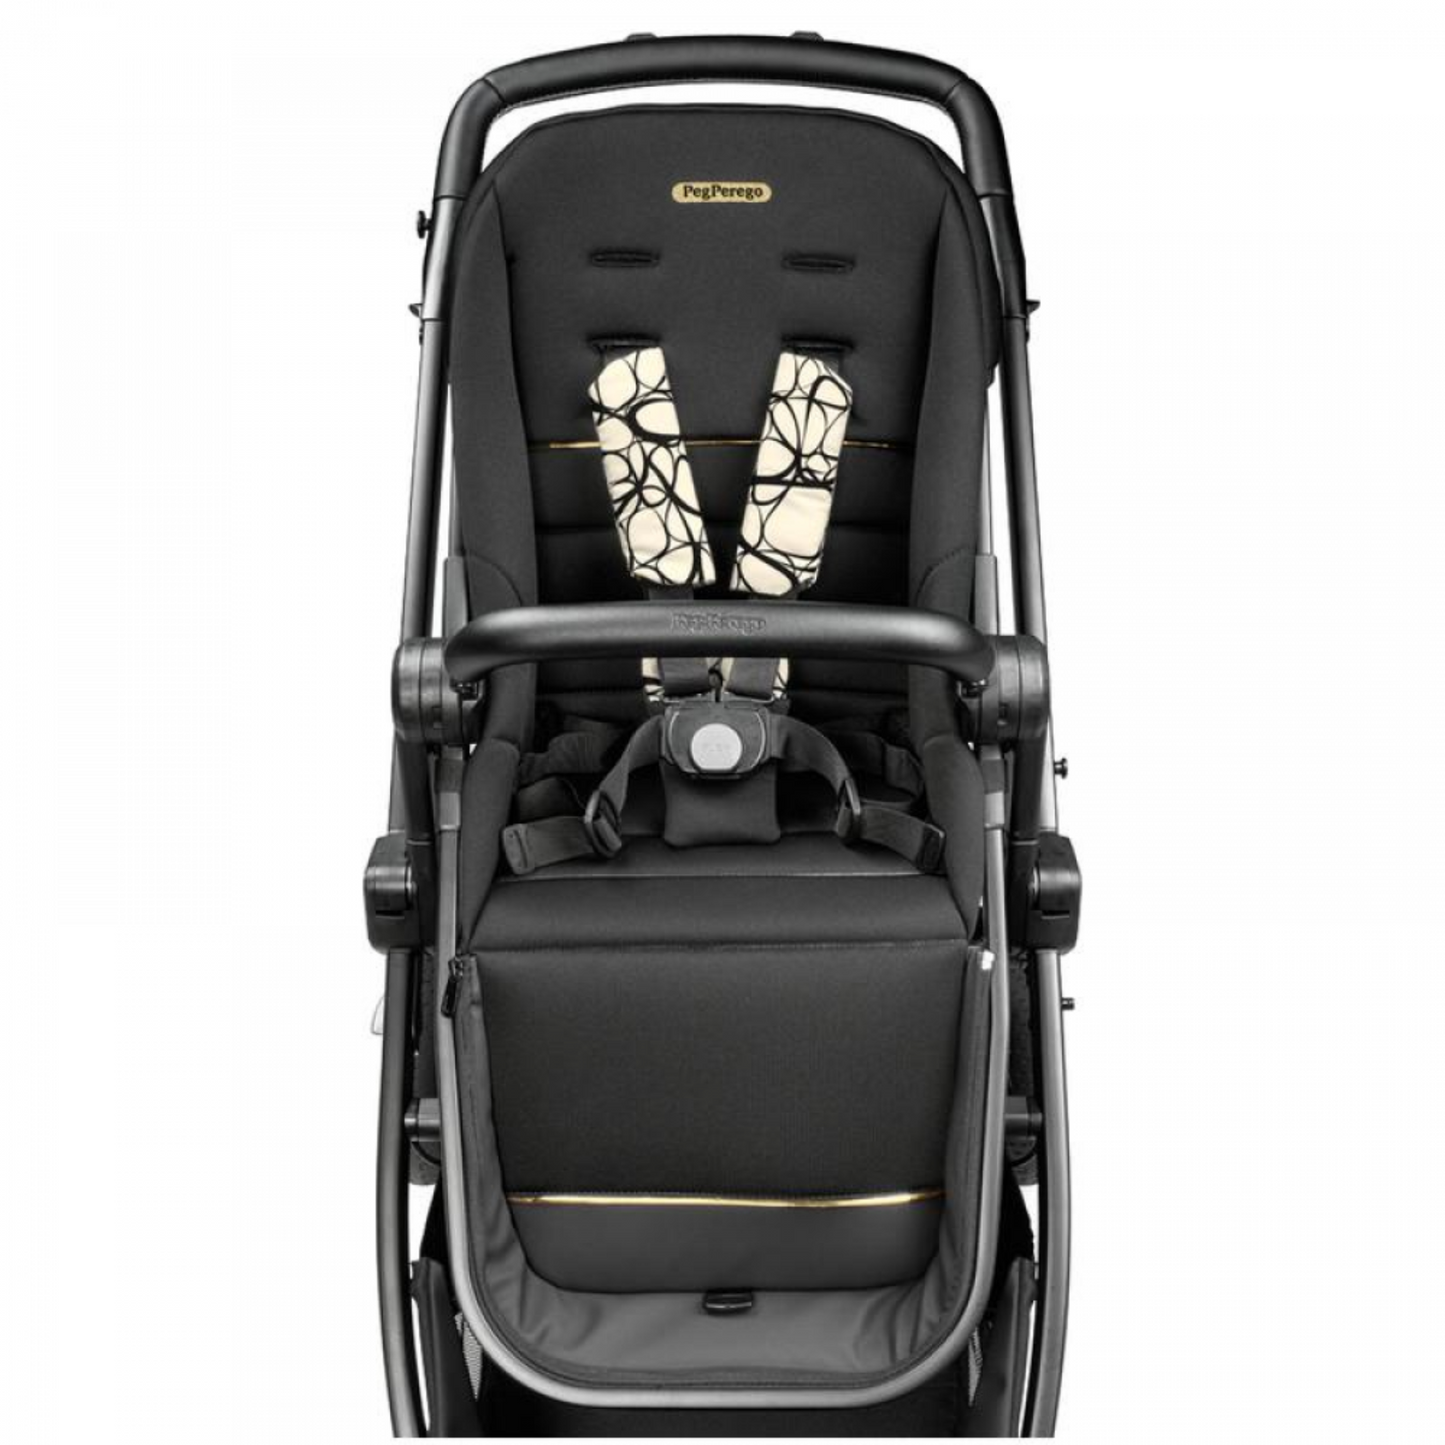 Peg Perego Ypsi 3 in 1 I Size Travel System - Graphic Gold